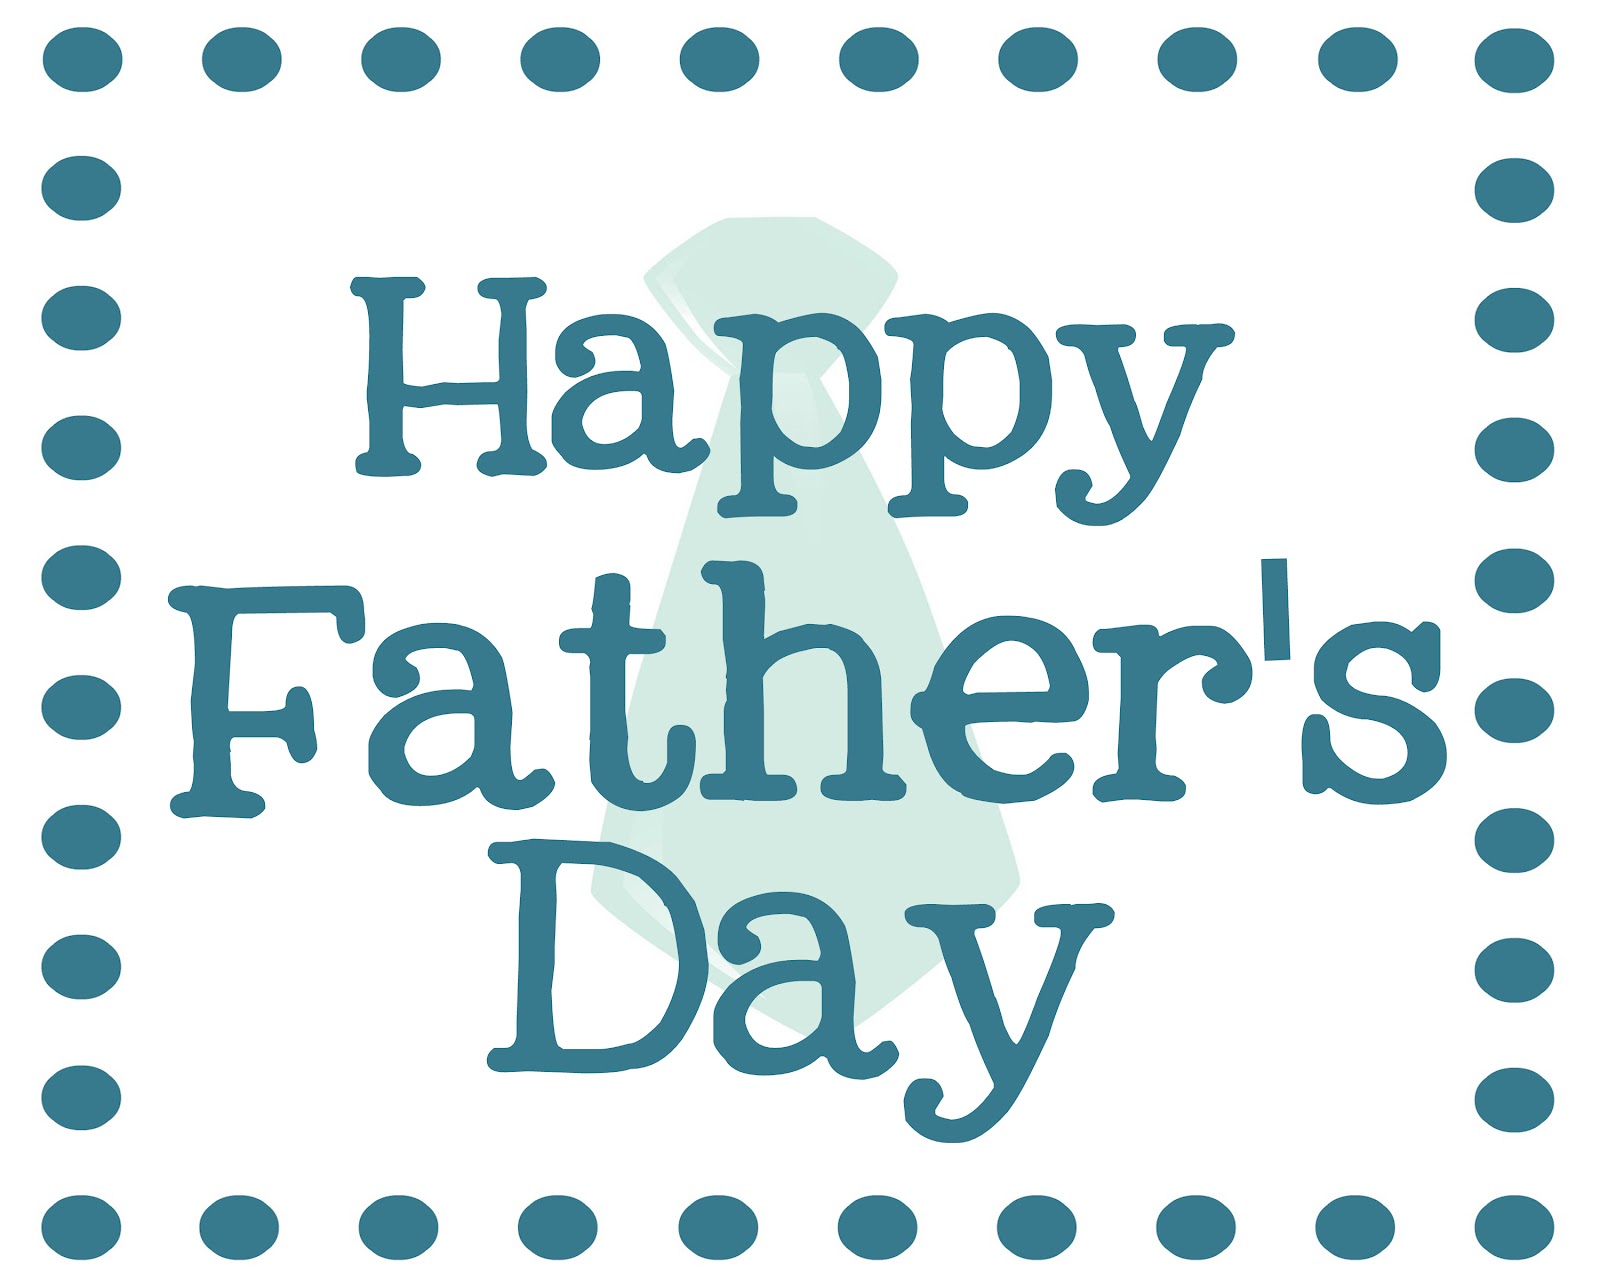 Happy Fathers Day Free Ecards, Free Clip Art, Printable Cards Happy